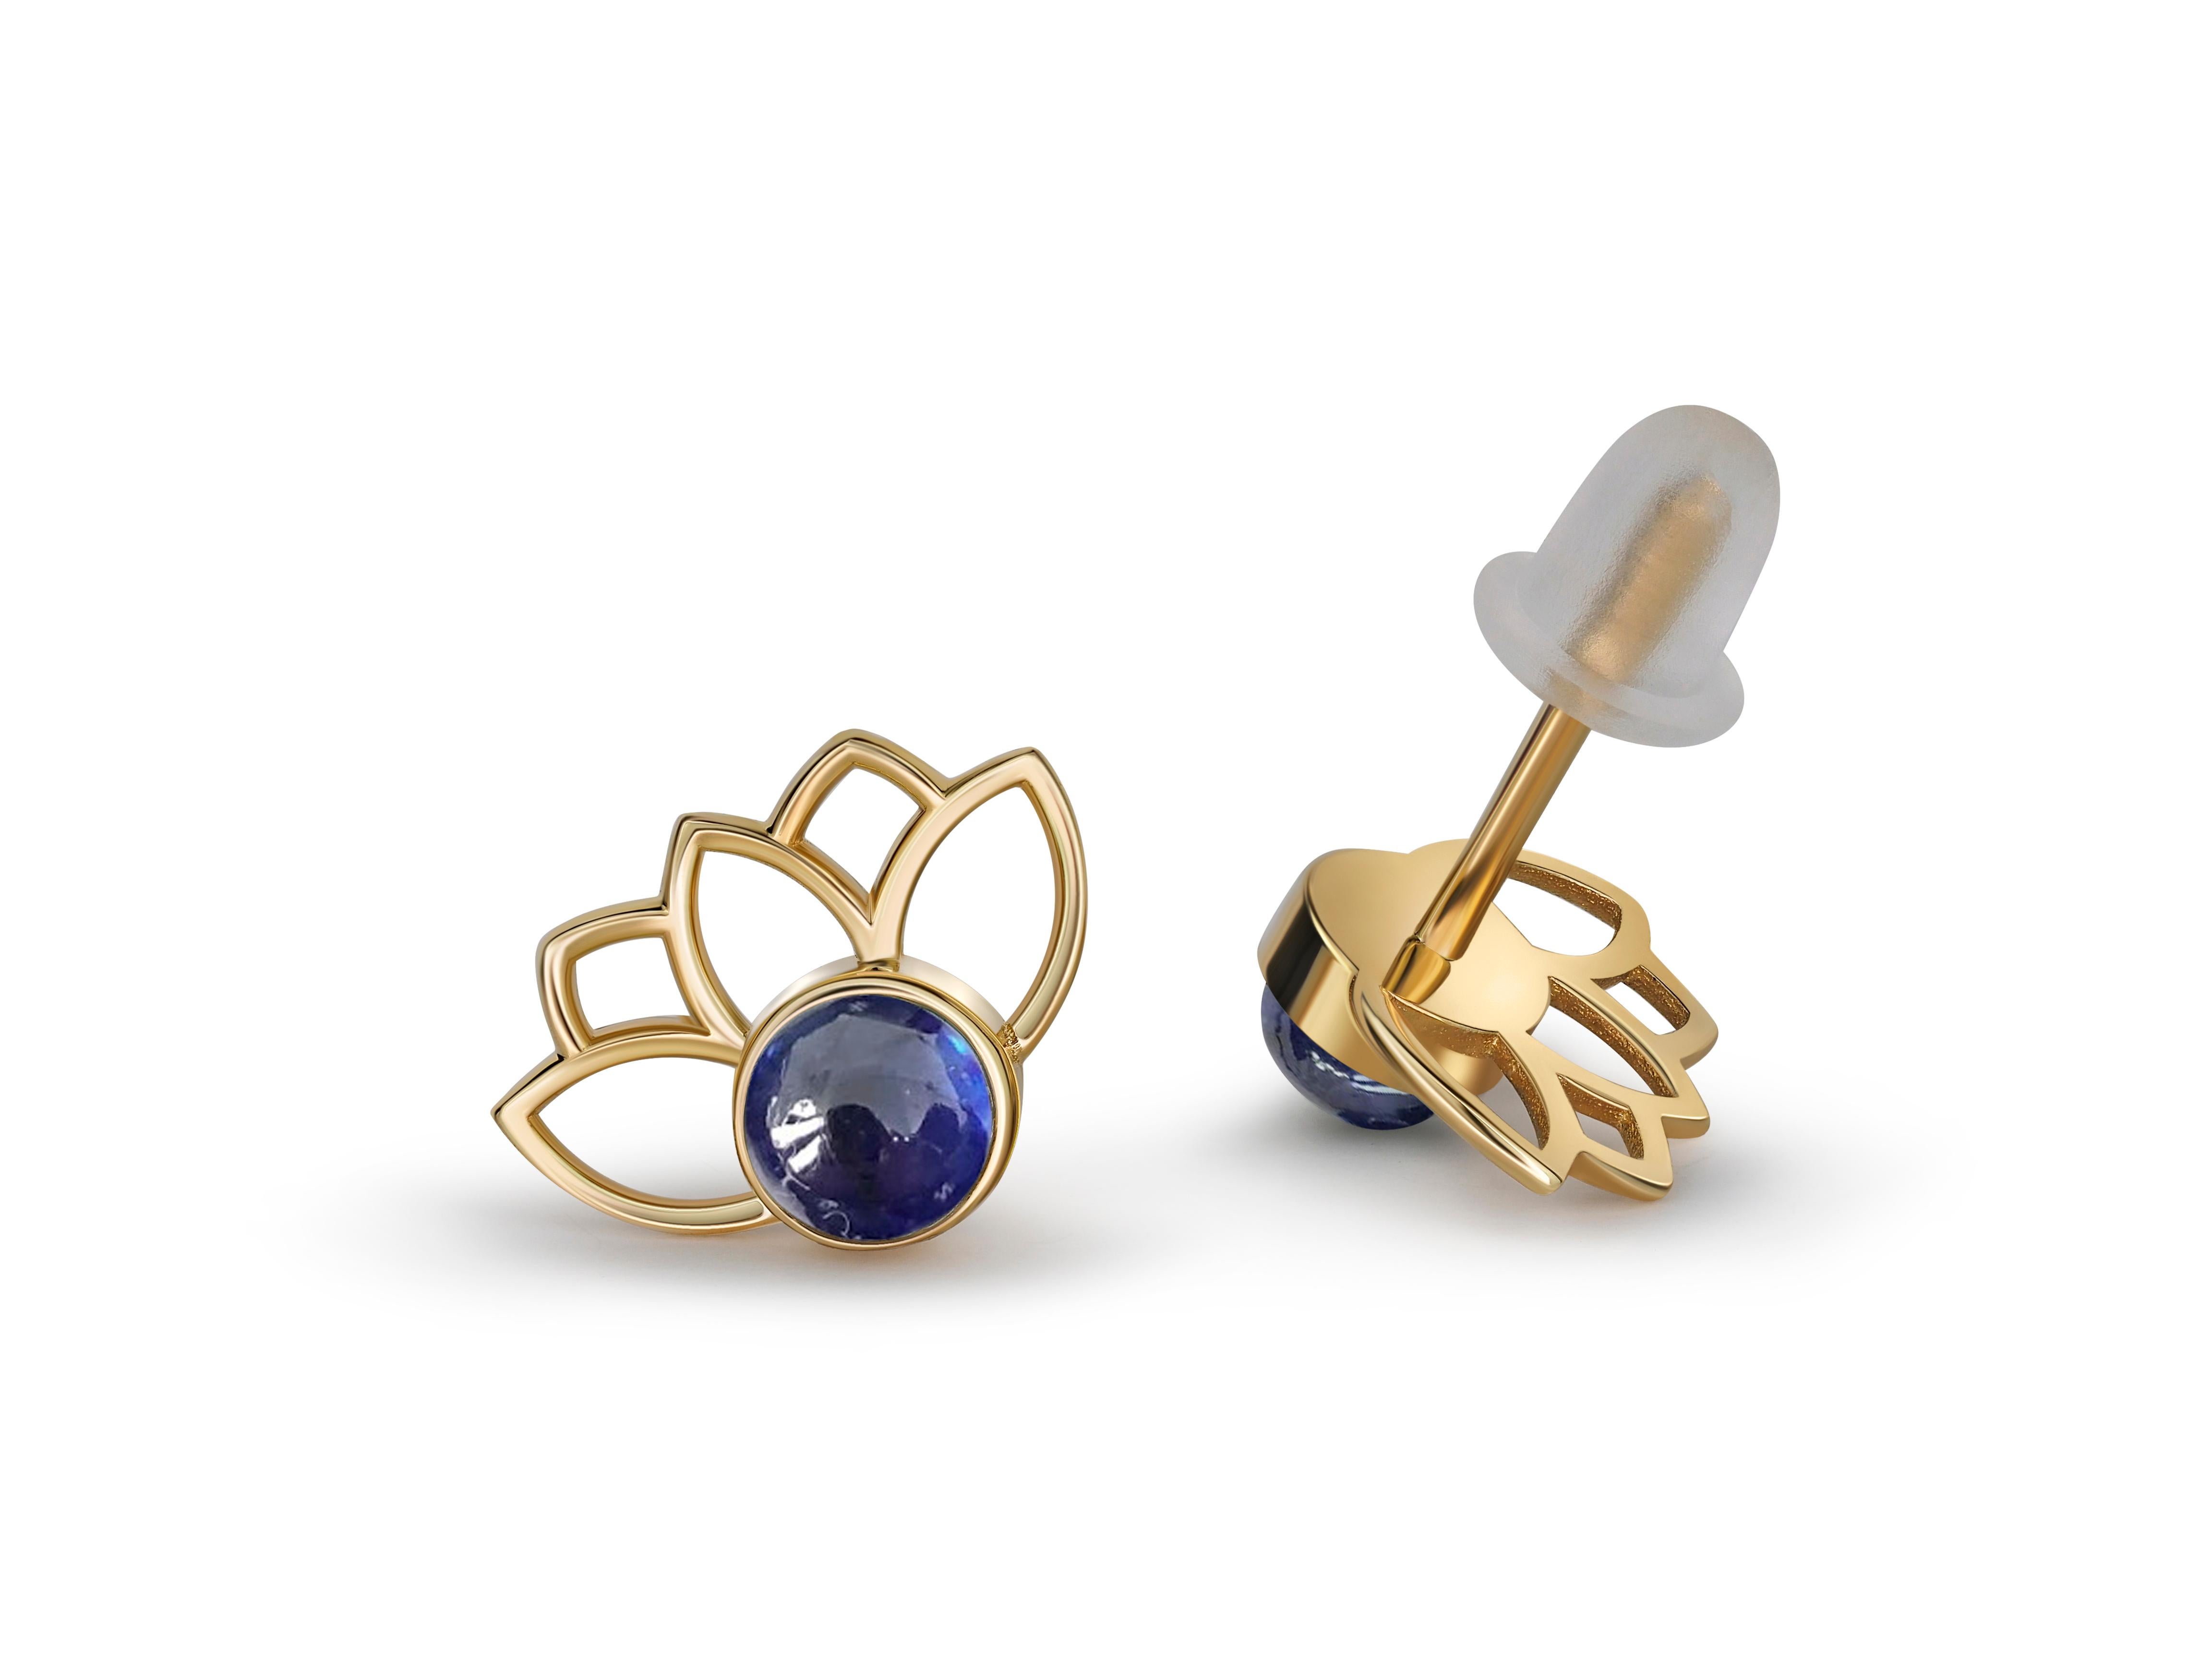 Cabochon Lotus earrings studs with sapphires in 14k gold.  For Sale